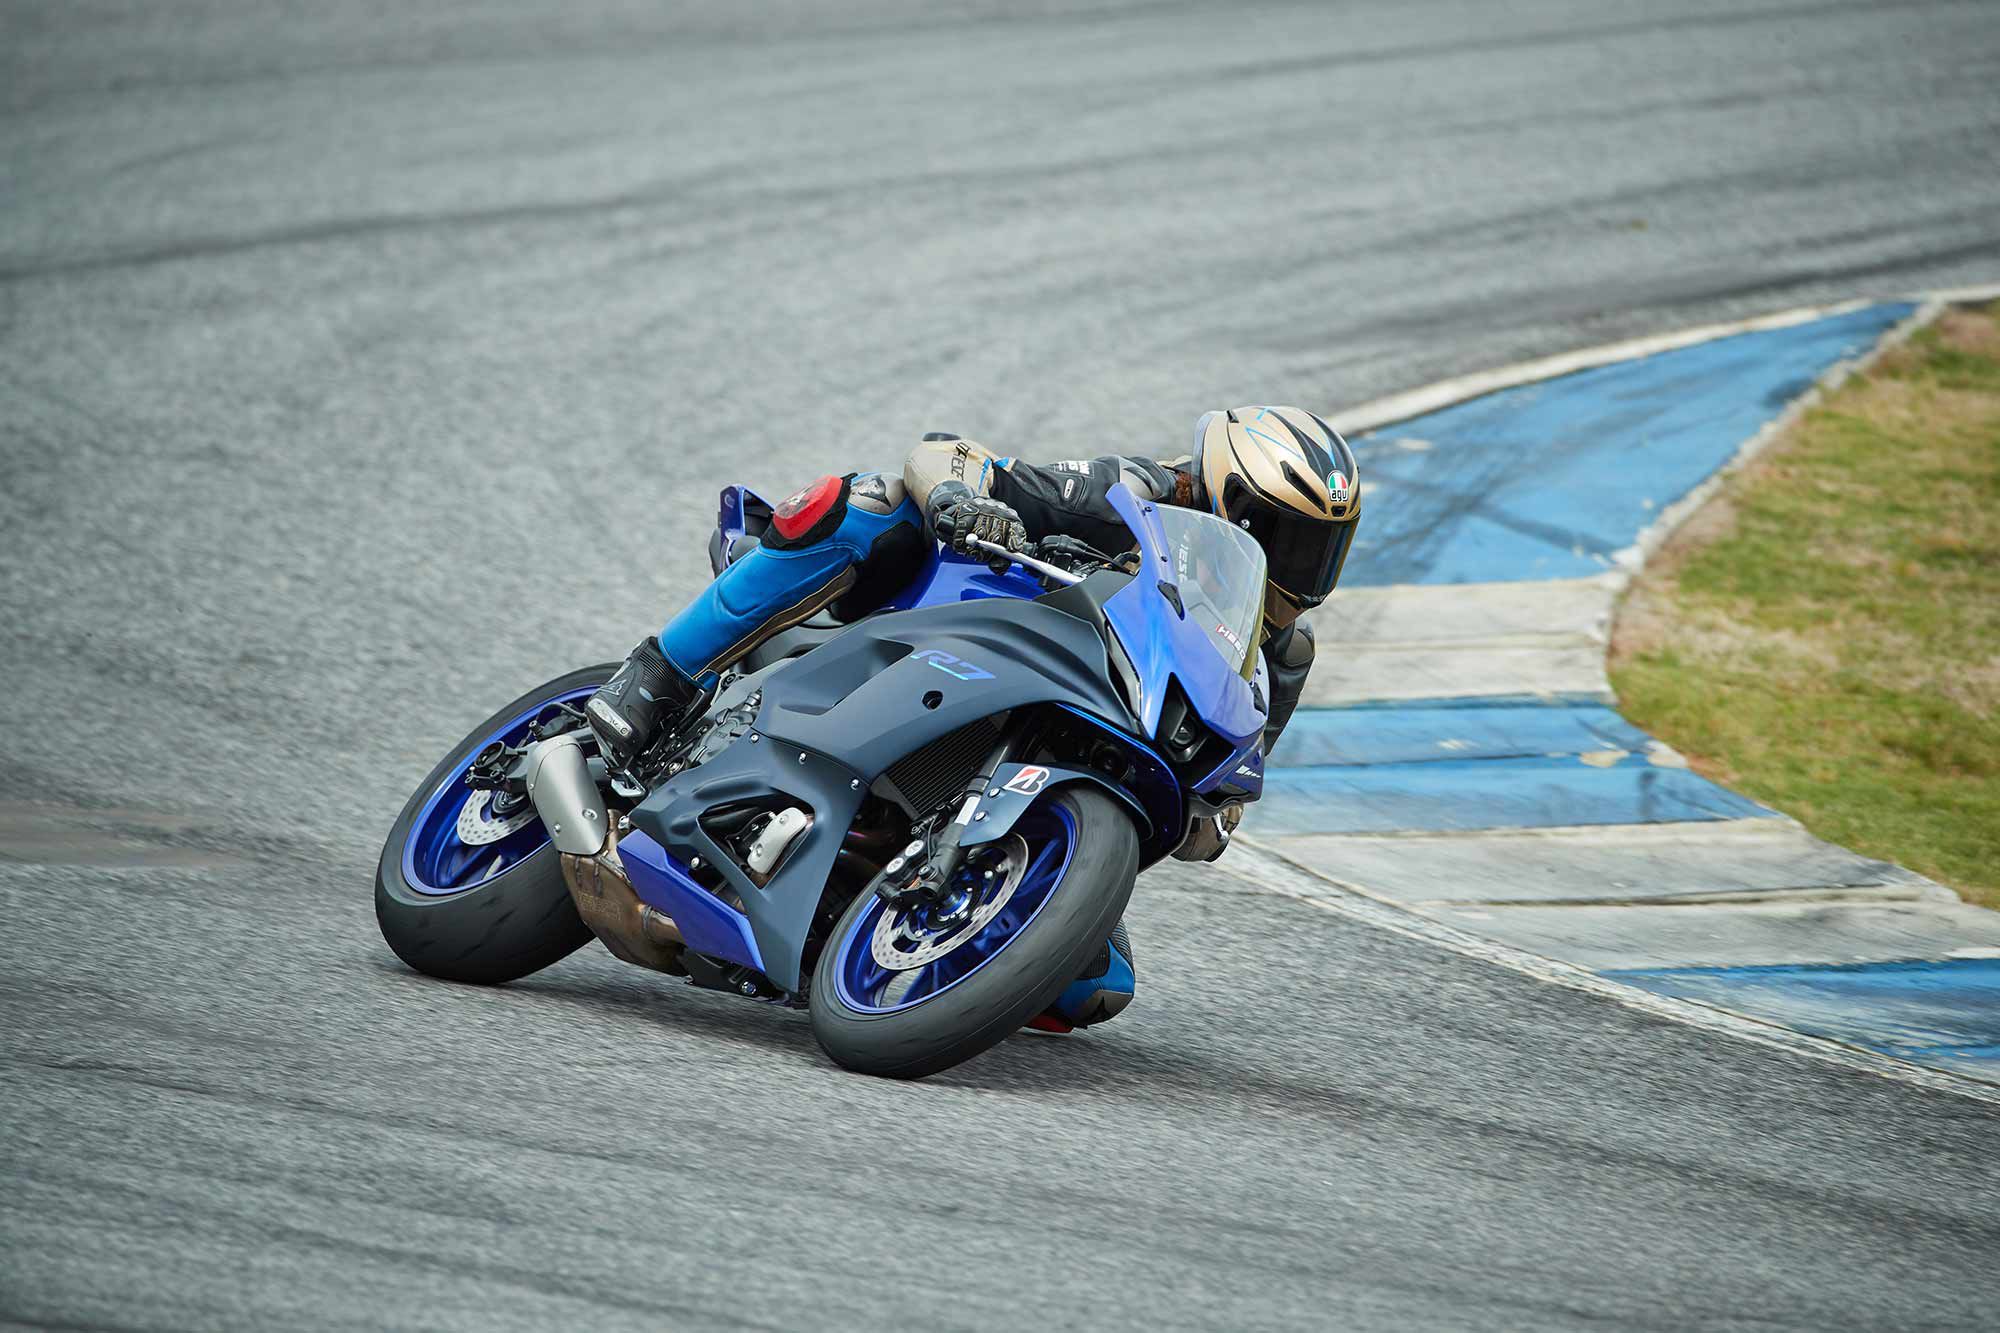 This YZF impresses with its agility and how easy it is to ride.